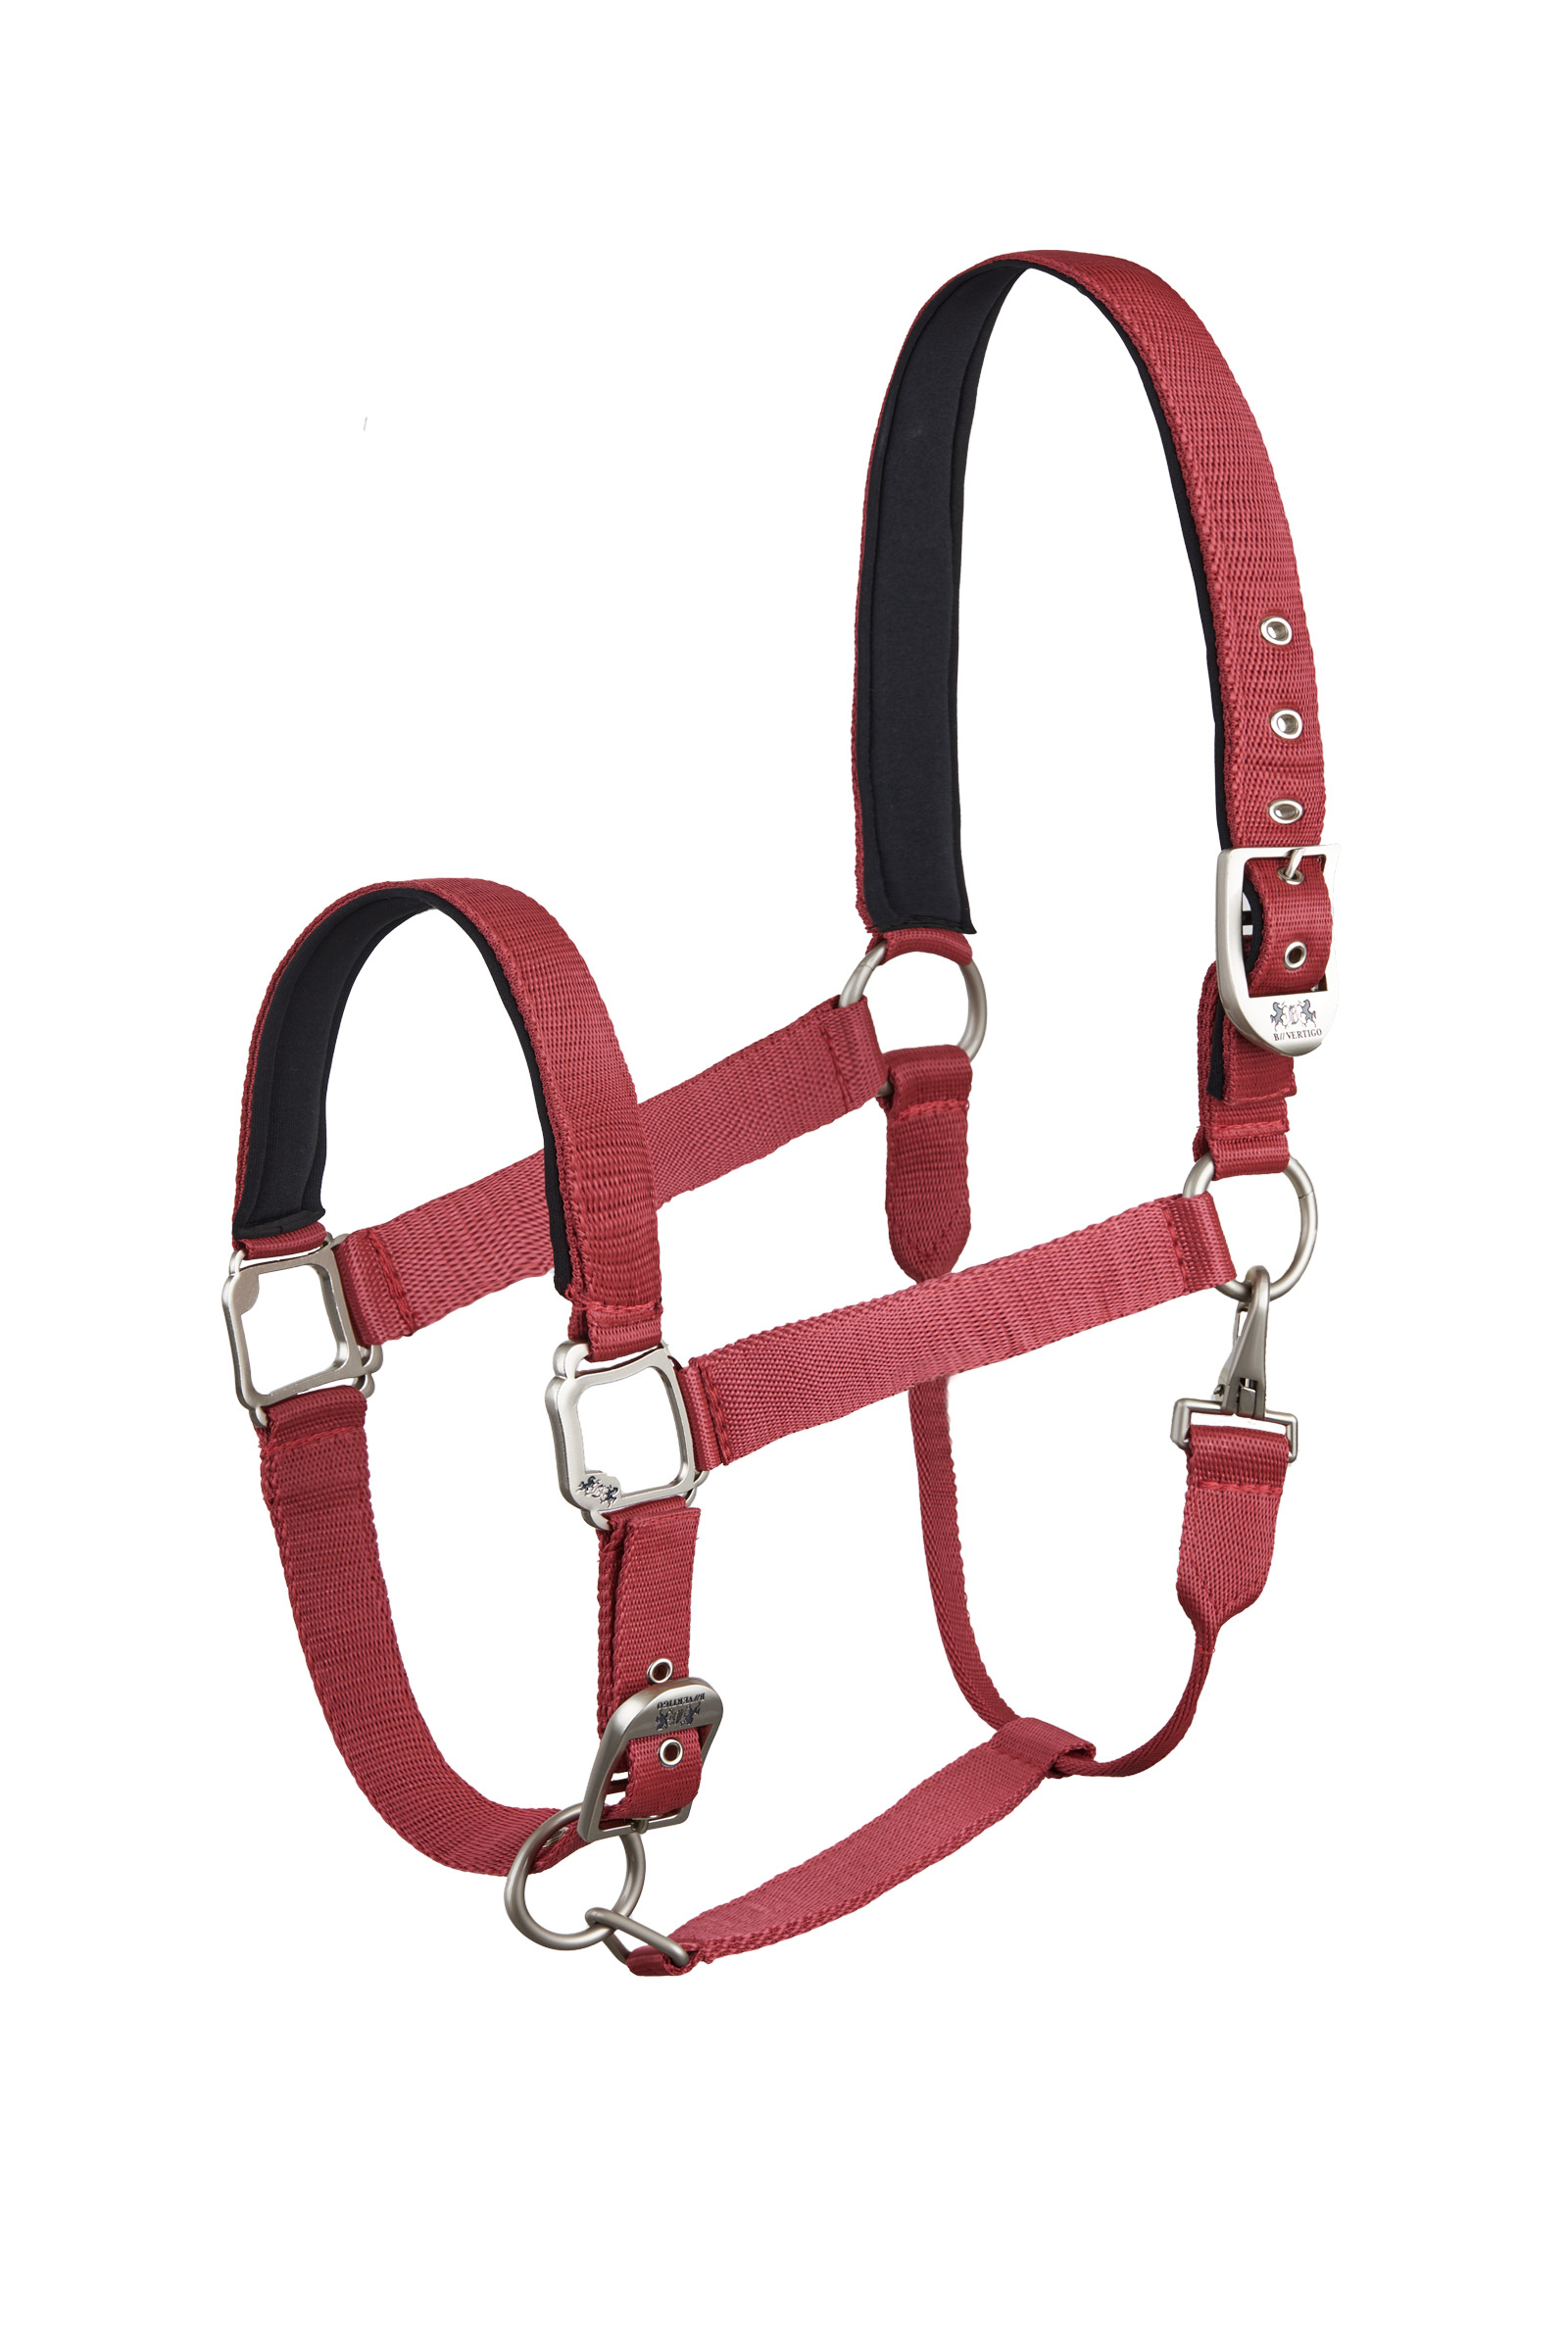 Halters and Lead Ropes for Horses  Buckle Nose Halter - Two Horse Tack